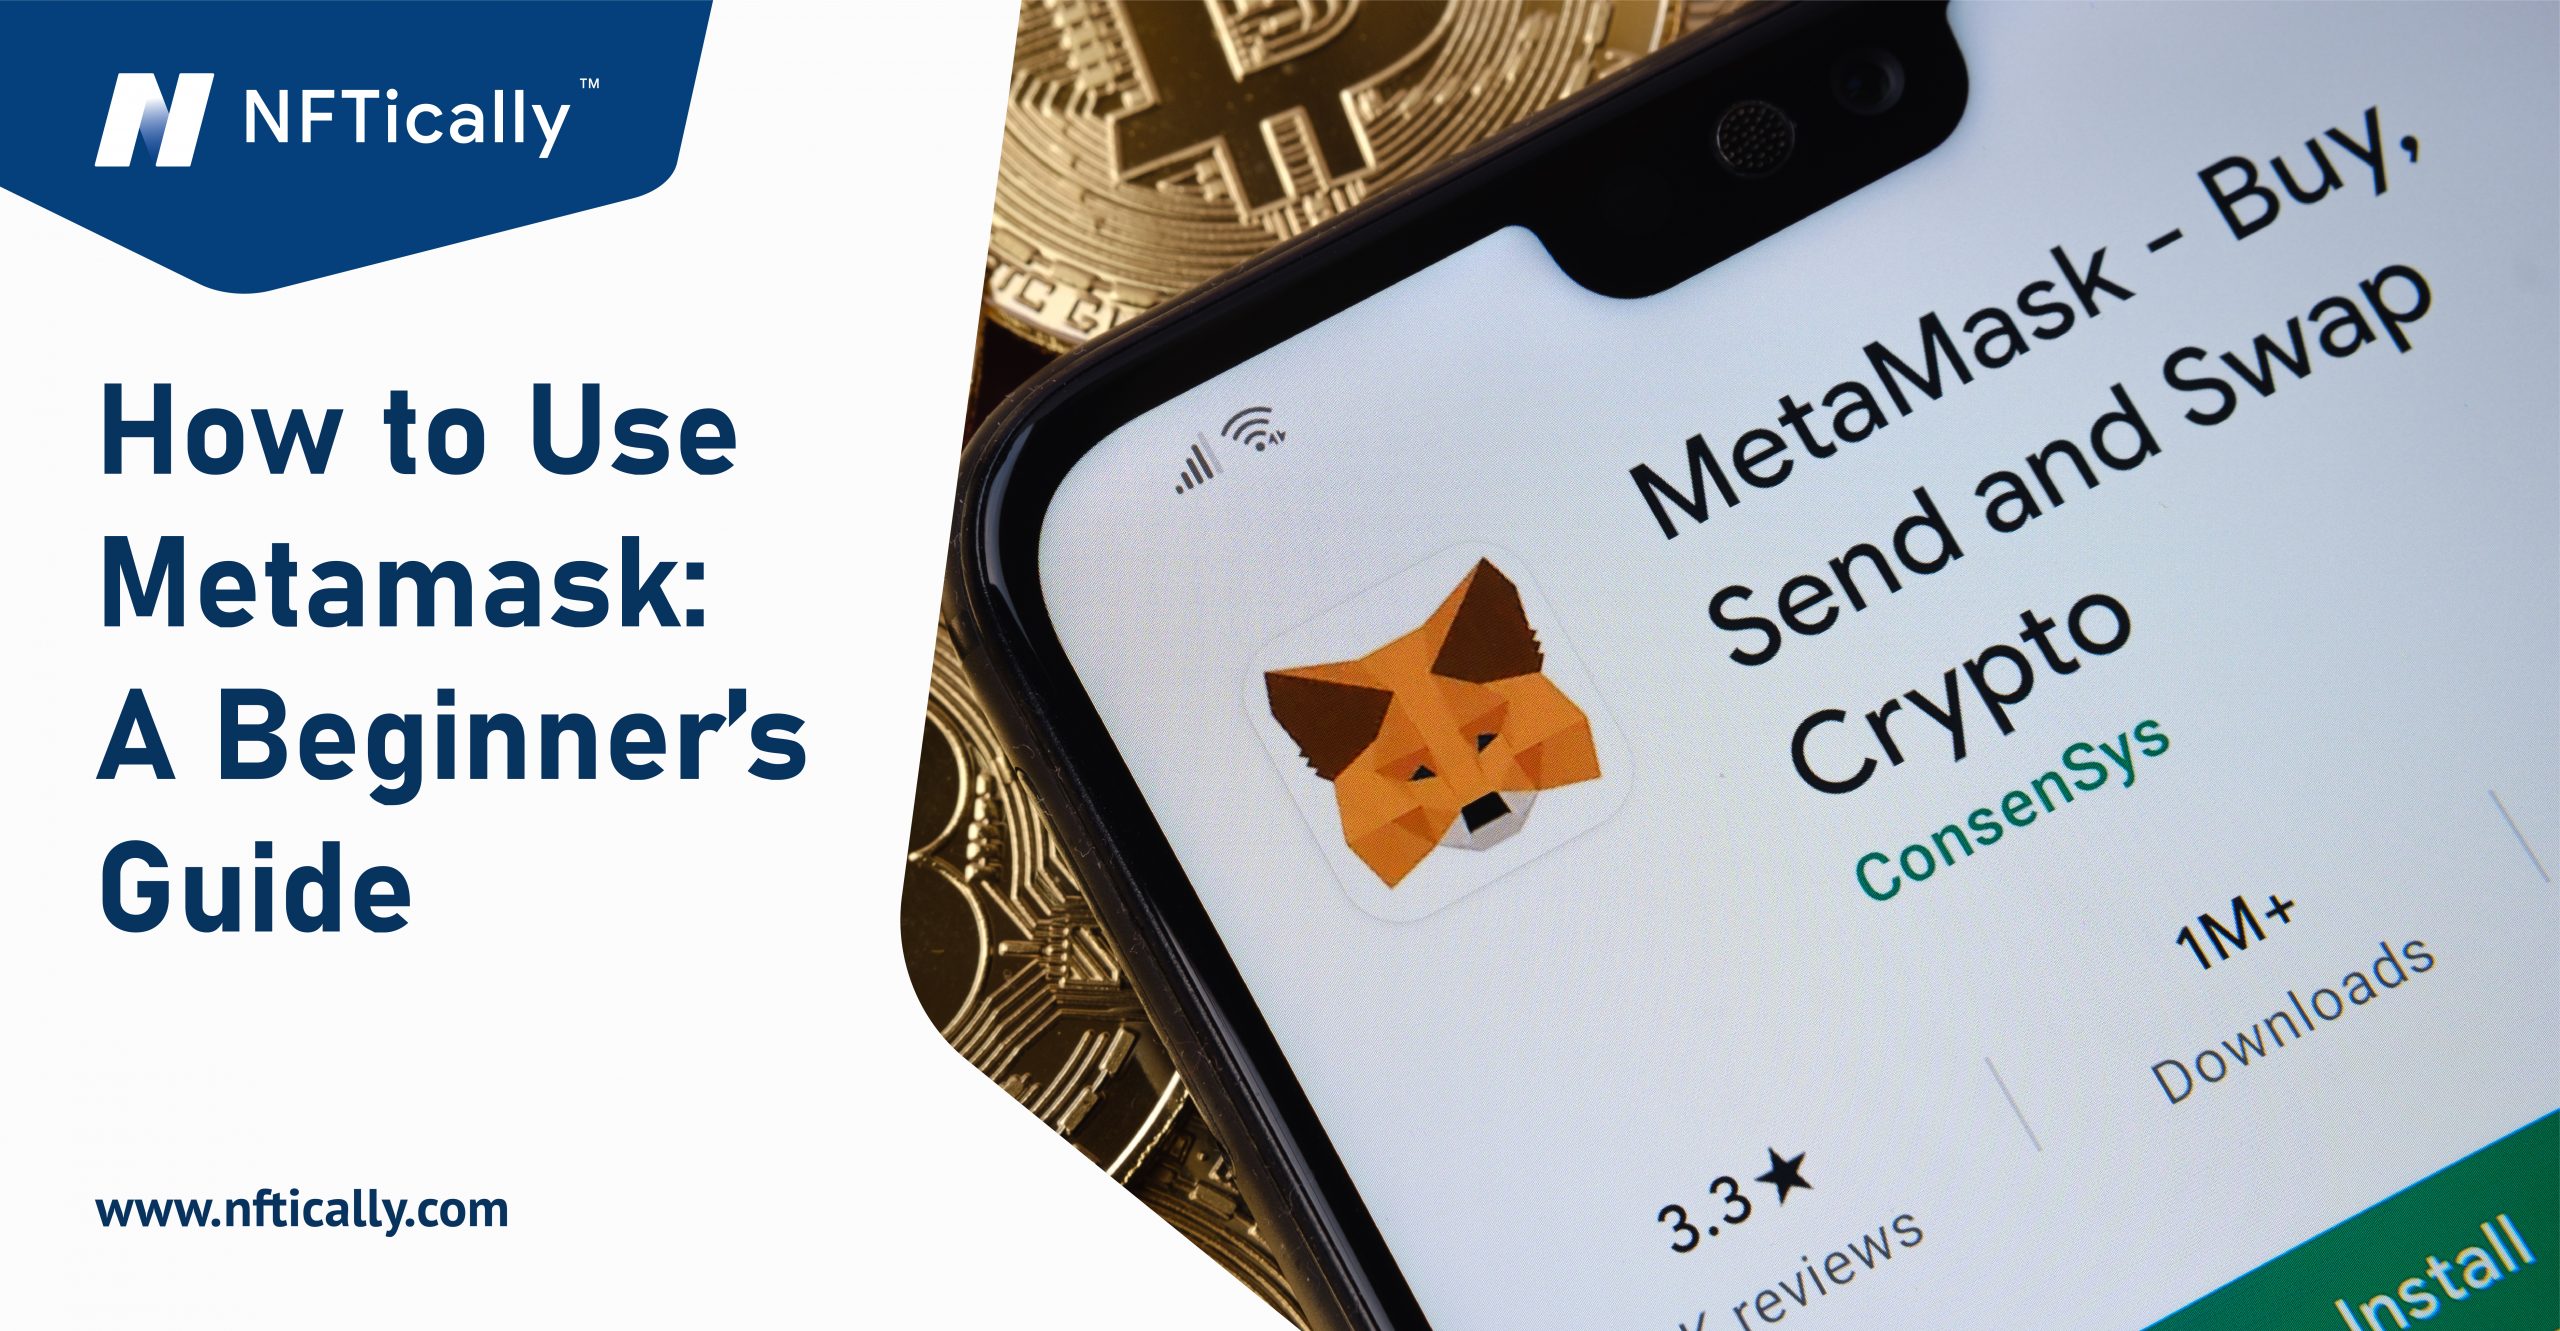 How to Use Metamask: A Beginner’s Guide